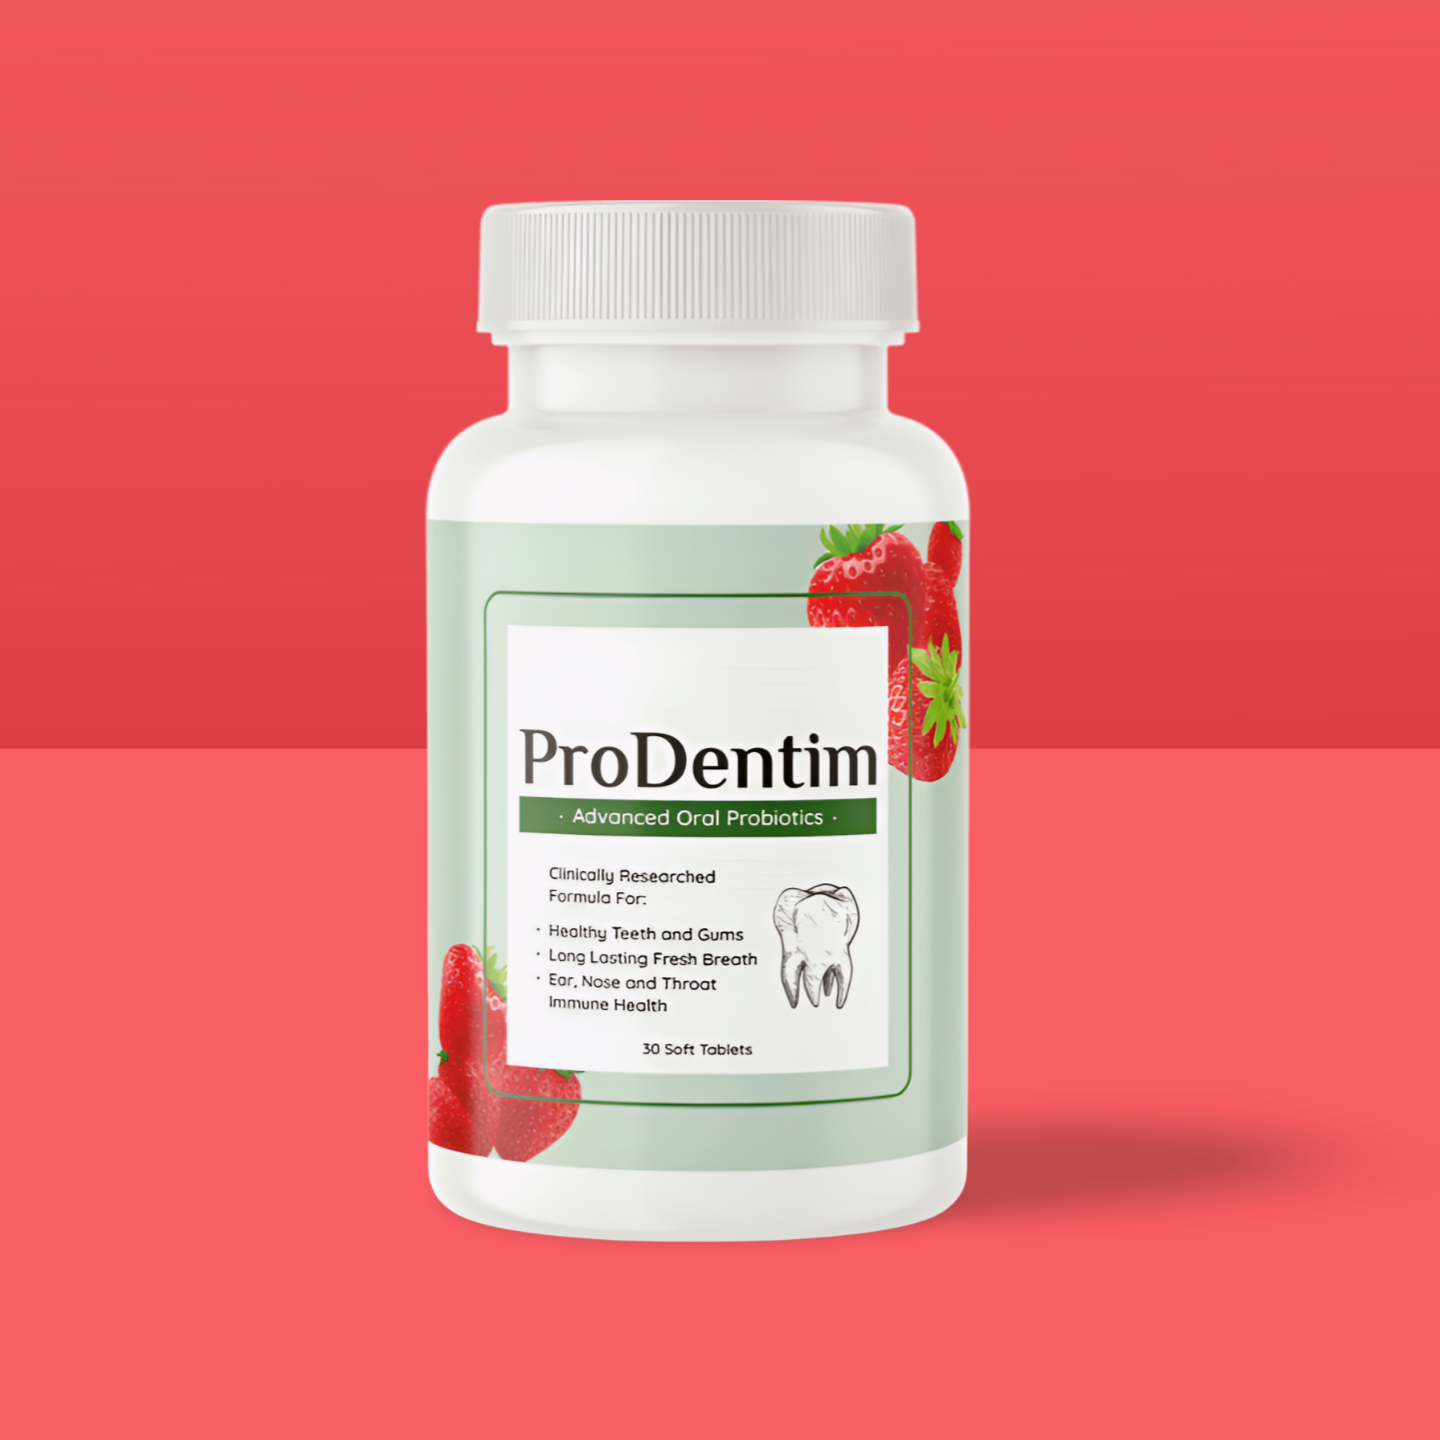 ProDentim Reviews – Is it Legit? Revealing the Truth About This Oral Health Supplement